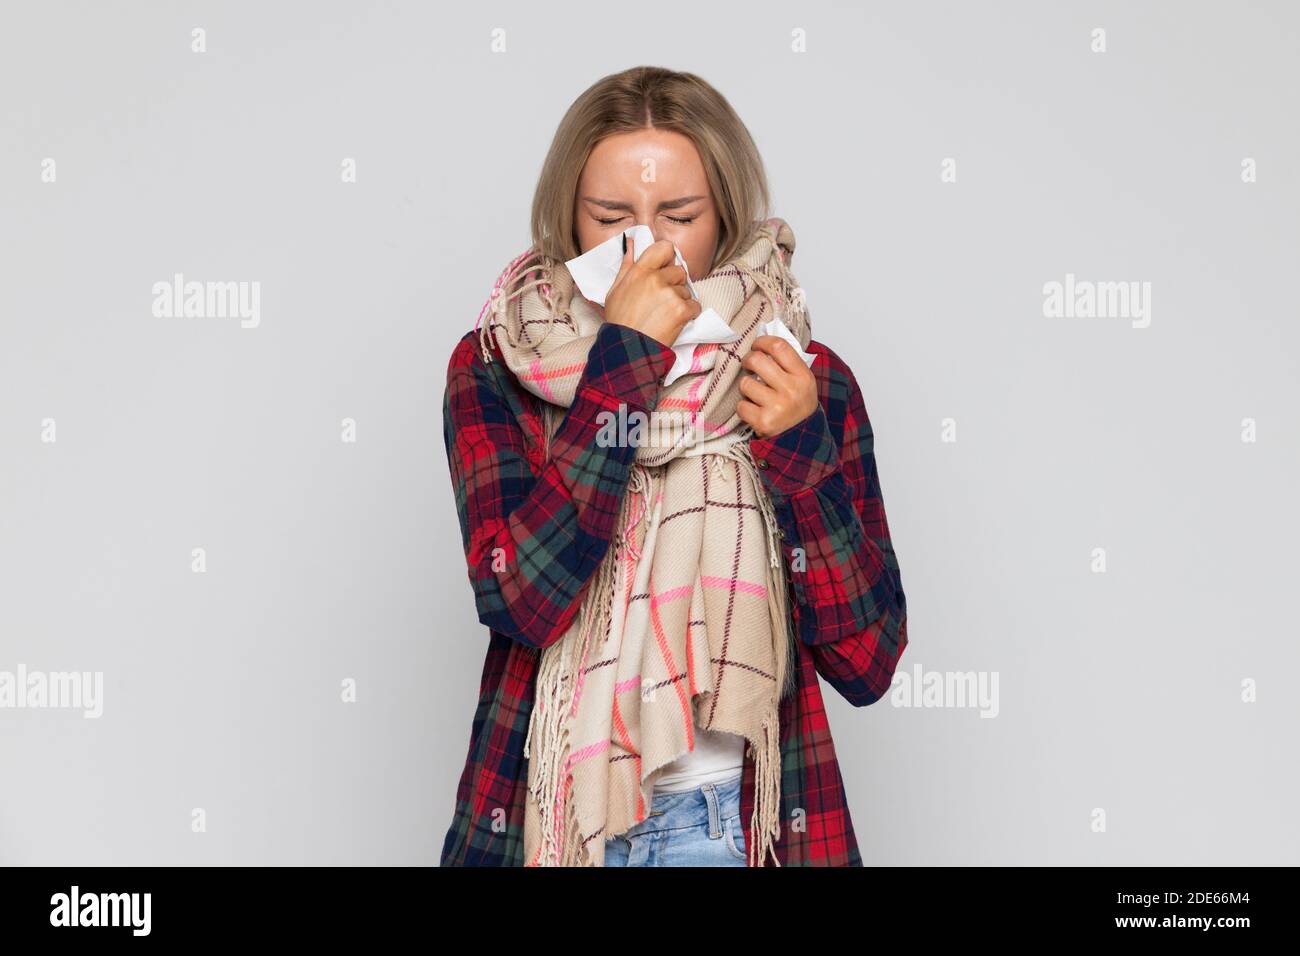 Upset sick woman sneezing or using napkin to wipe snot from her nose. Sick female has flu. Rhinitis, cold season, sickness Stock Photo